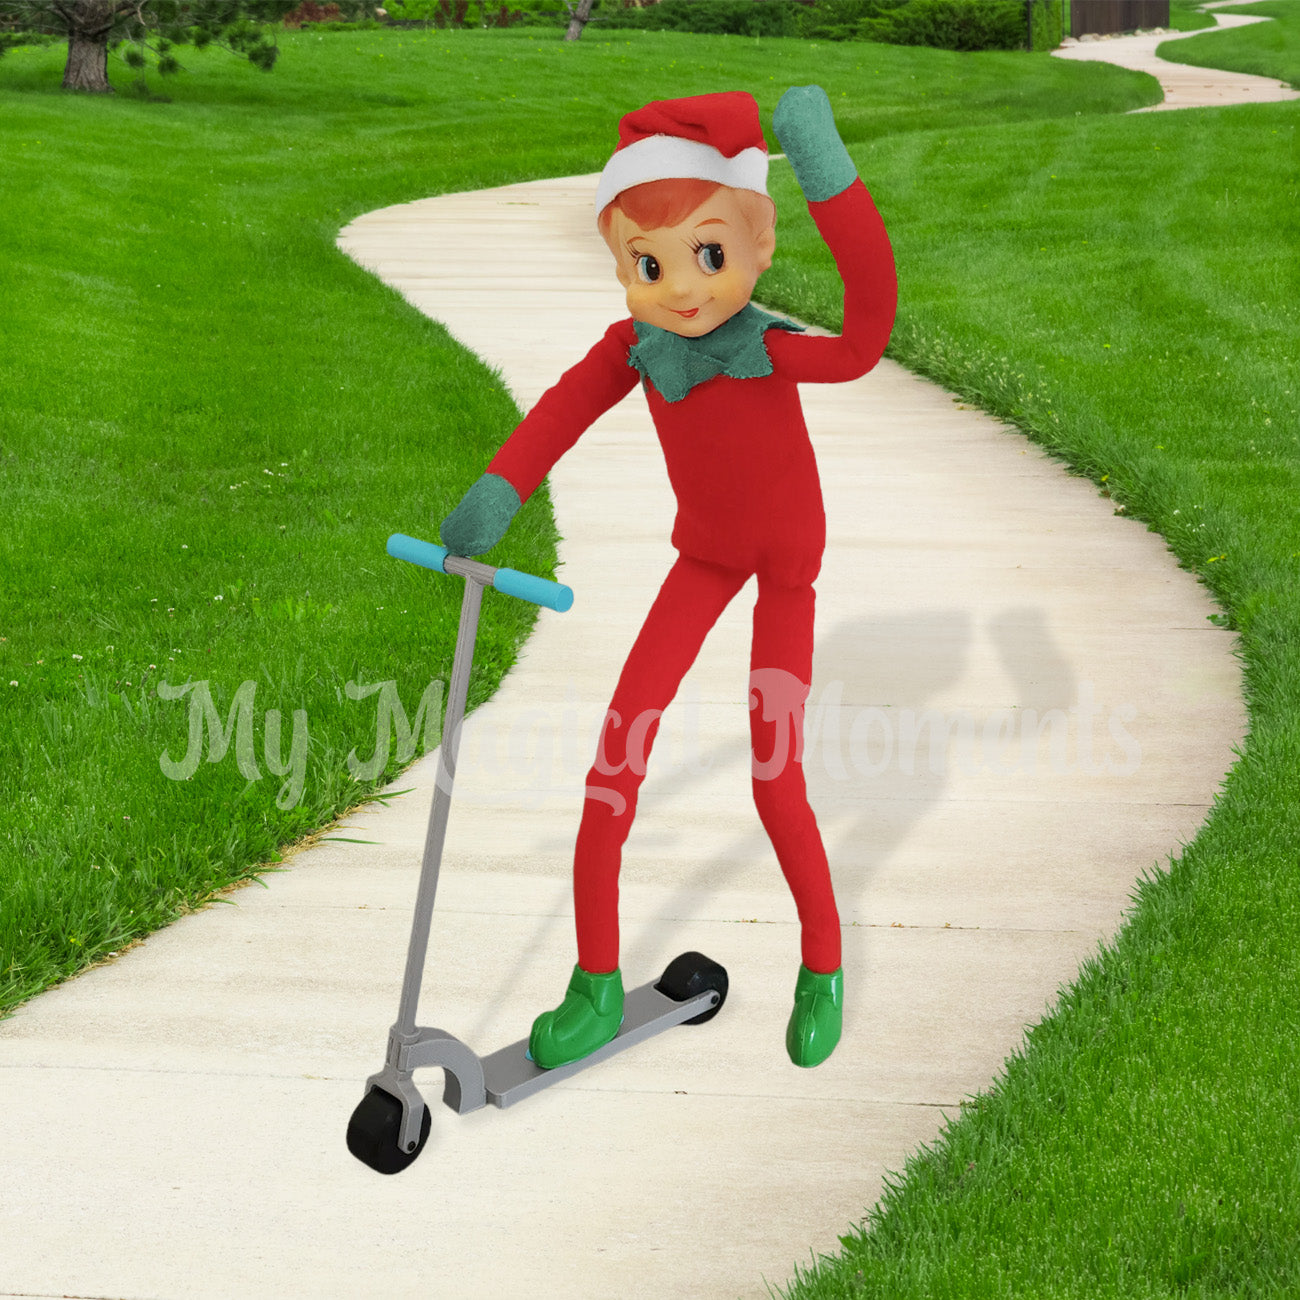 60s elf waving and using an elf sized scooter prop on a footpath